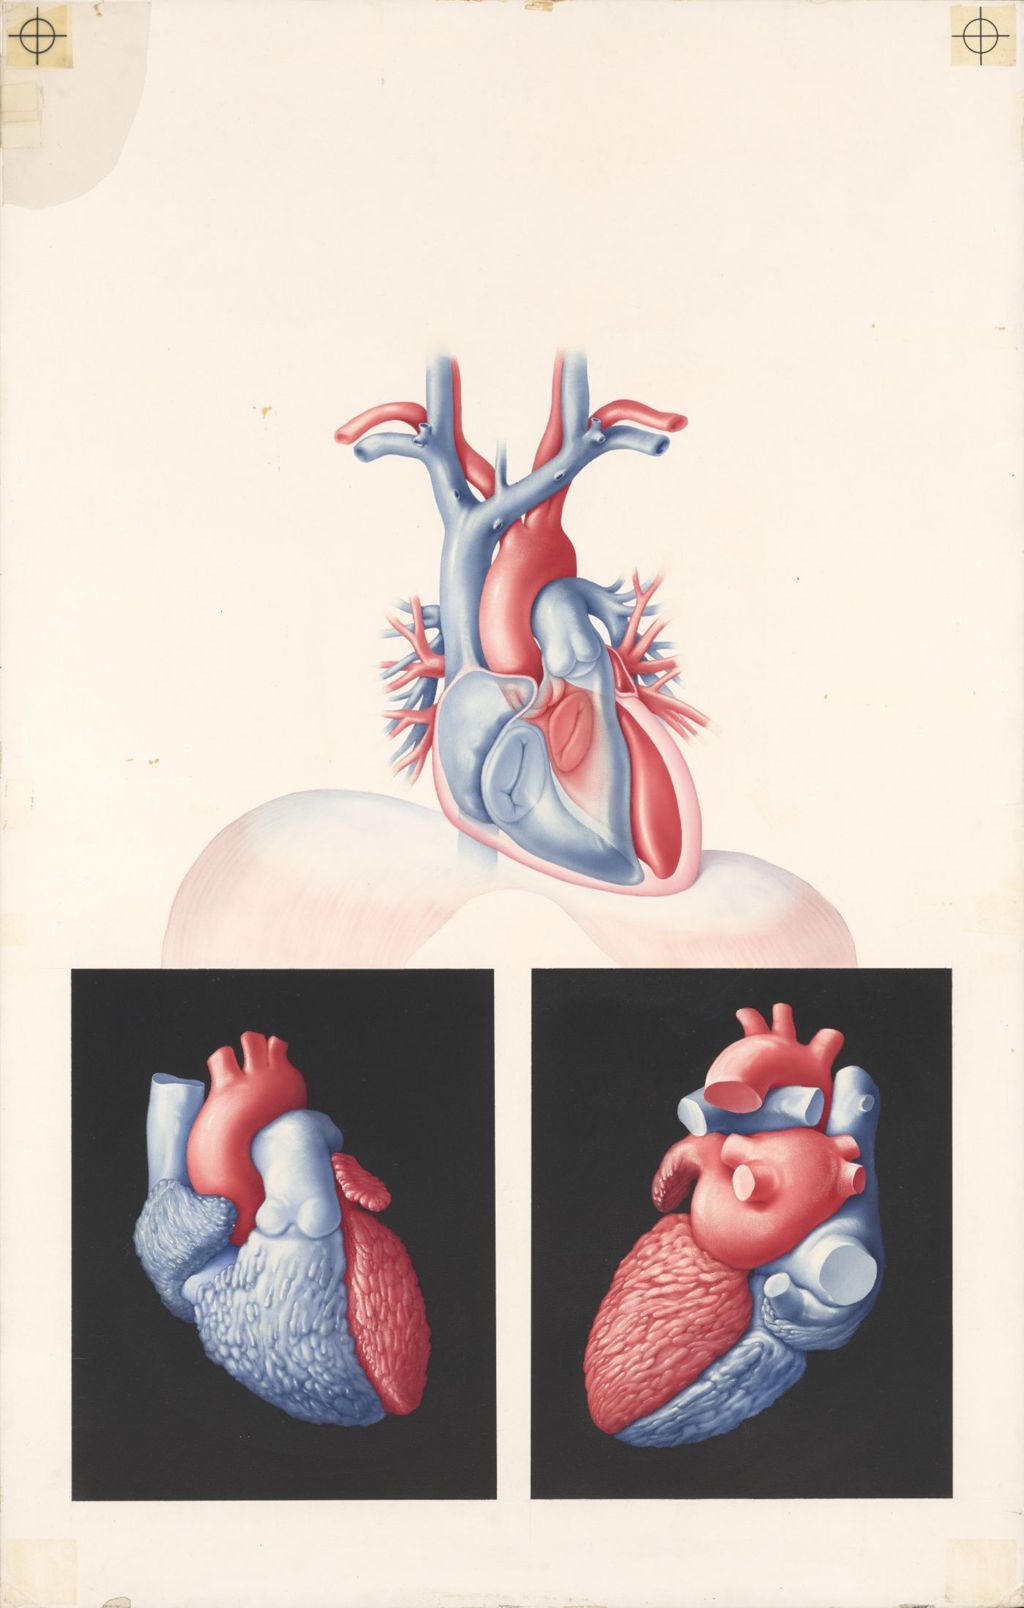 Medical Profiles, Cardiac auscultation, Plate I, The relationship of the heart and its chambers, Plate 198